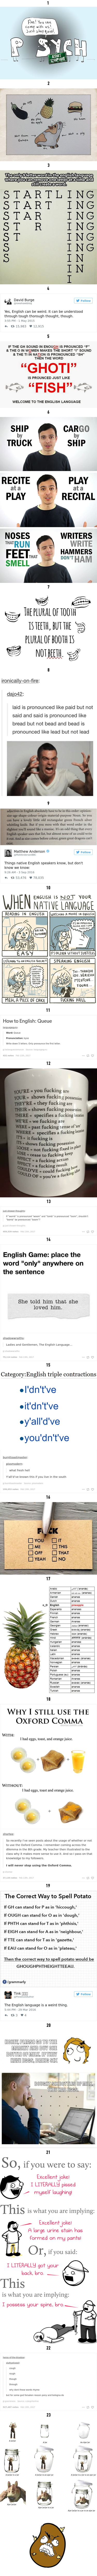 23 Hilarious Reasons Why The English Language Is The Worst 9GAG